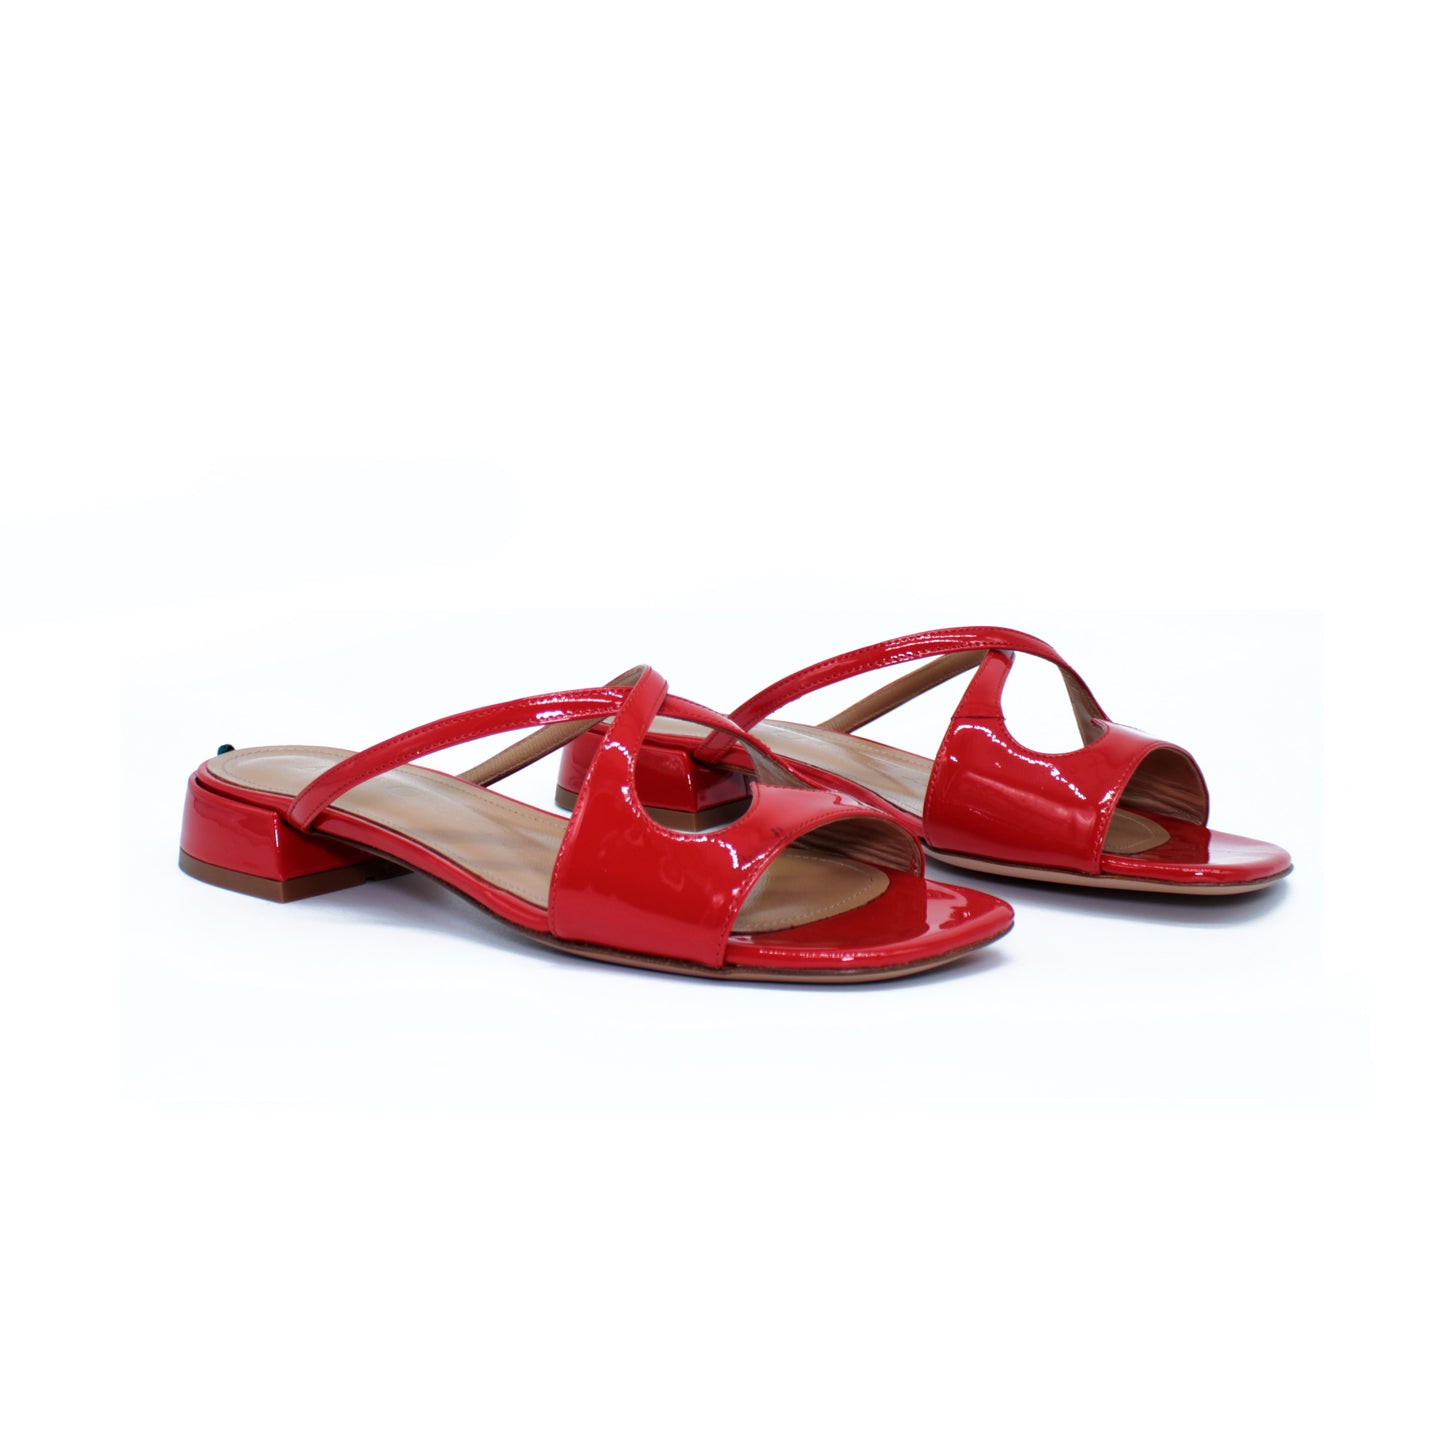 Slide Two for Love in red patent leather